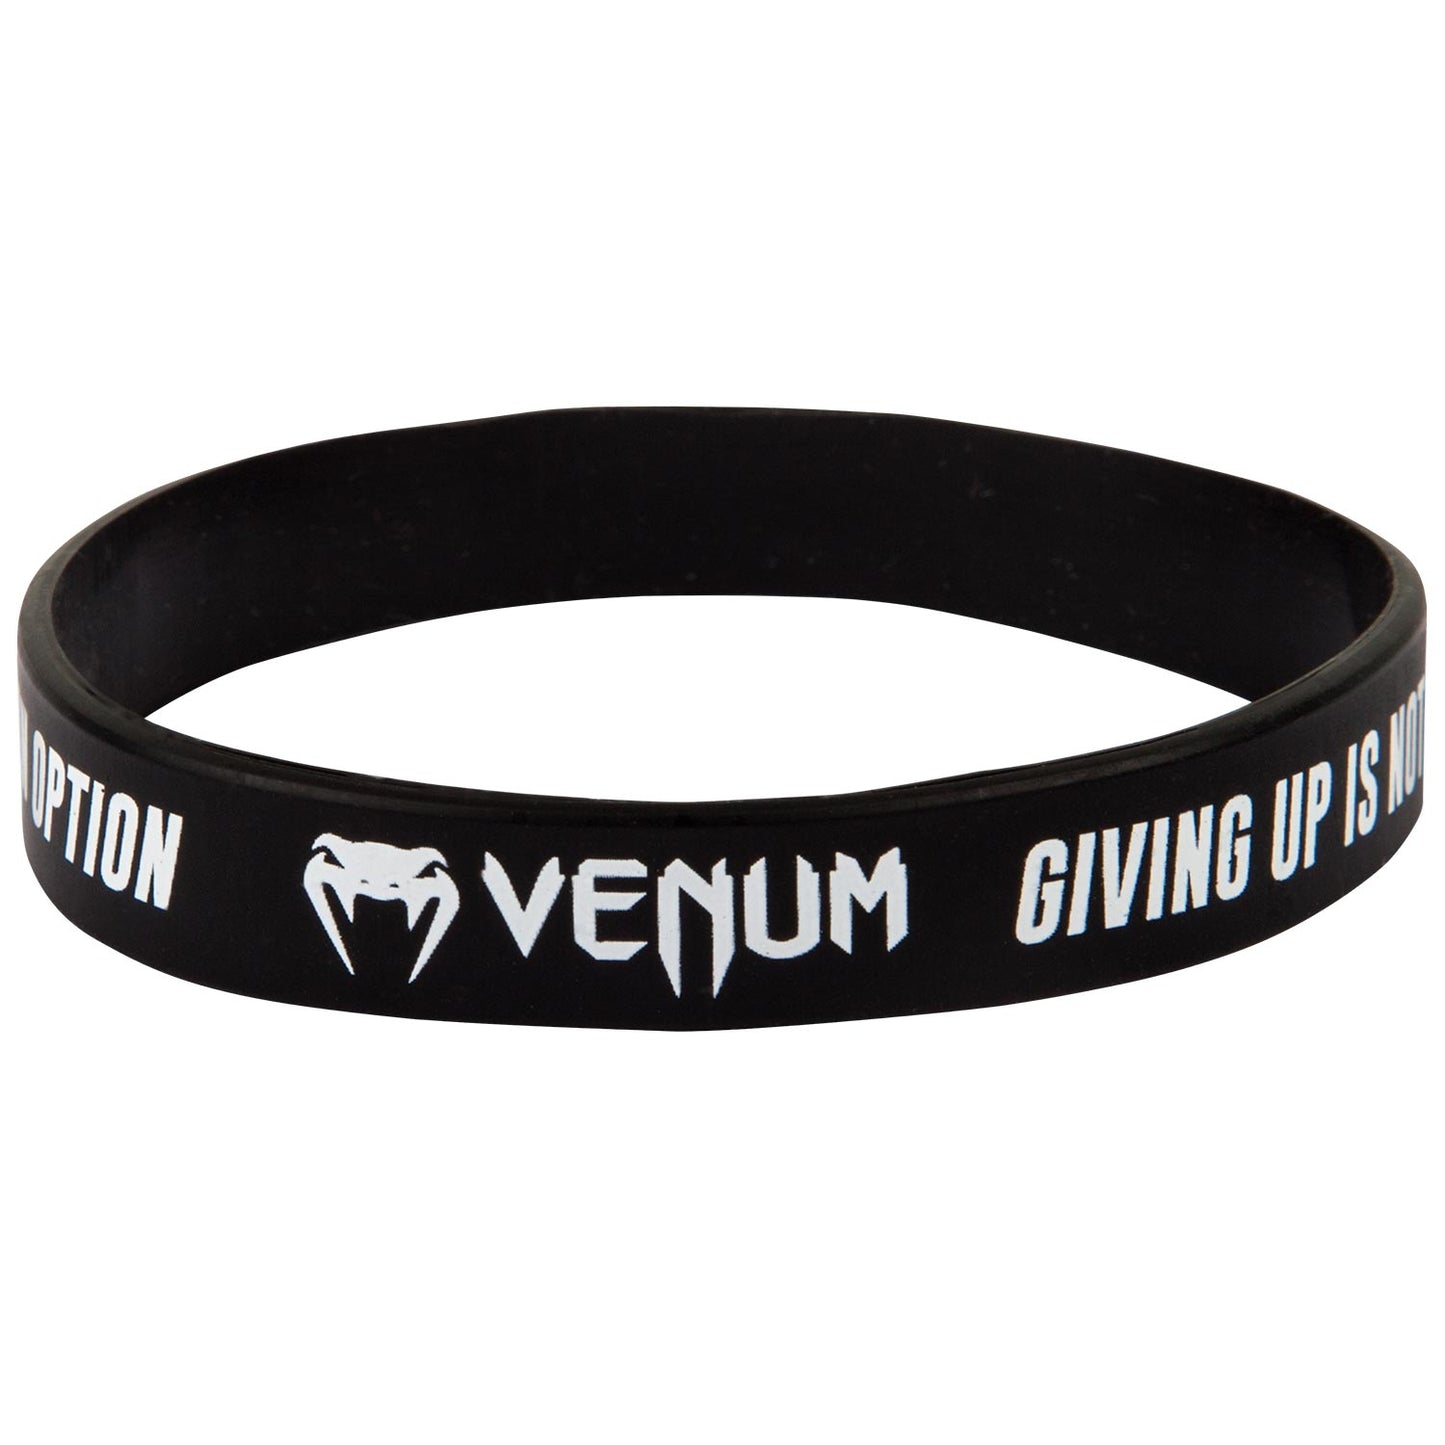 Venum Rubber Band - Giving up - Black